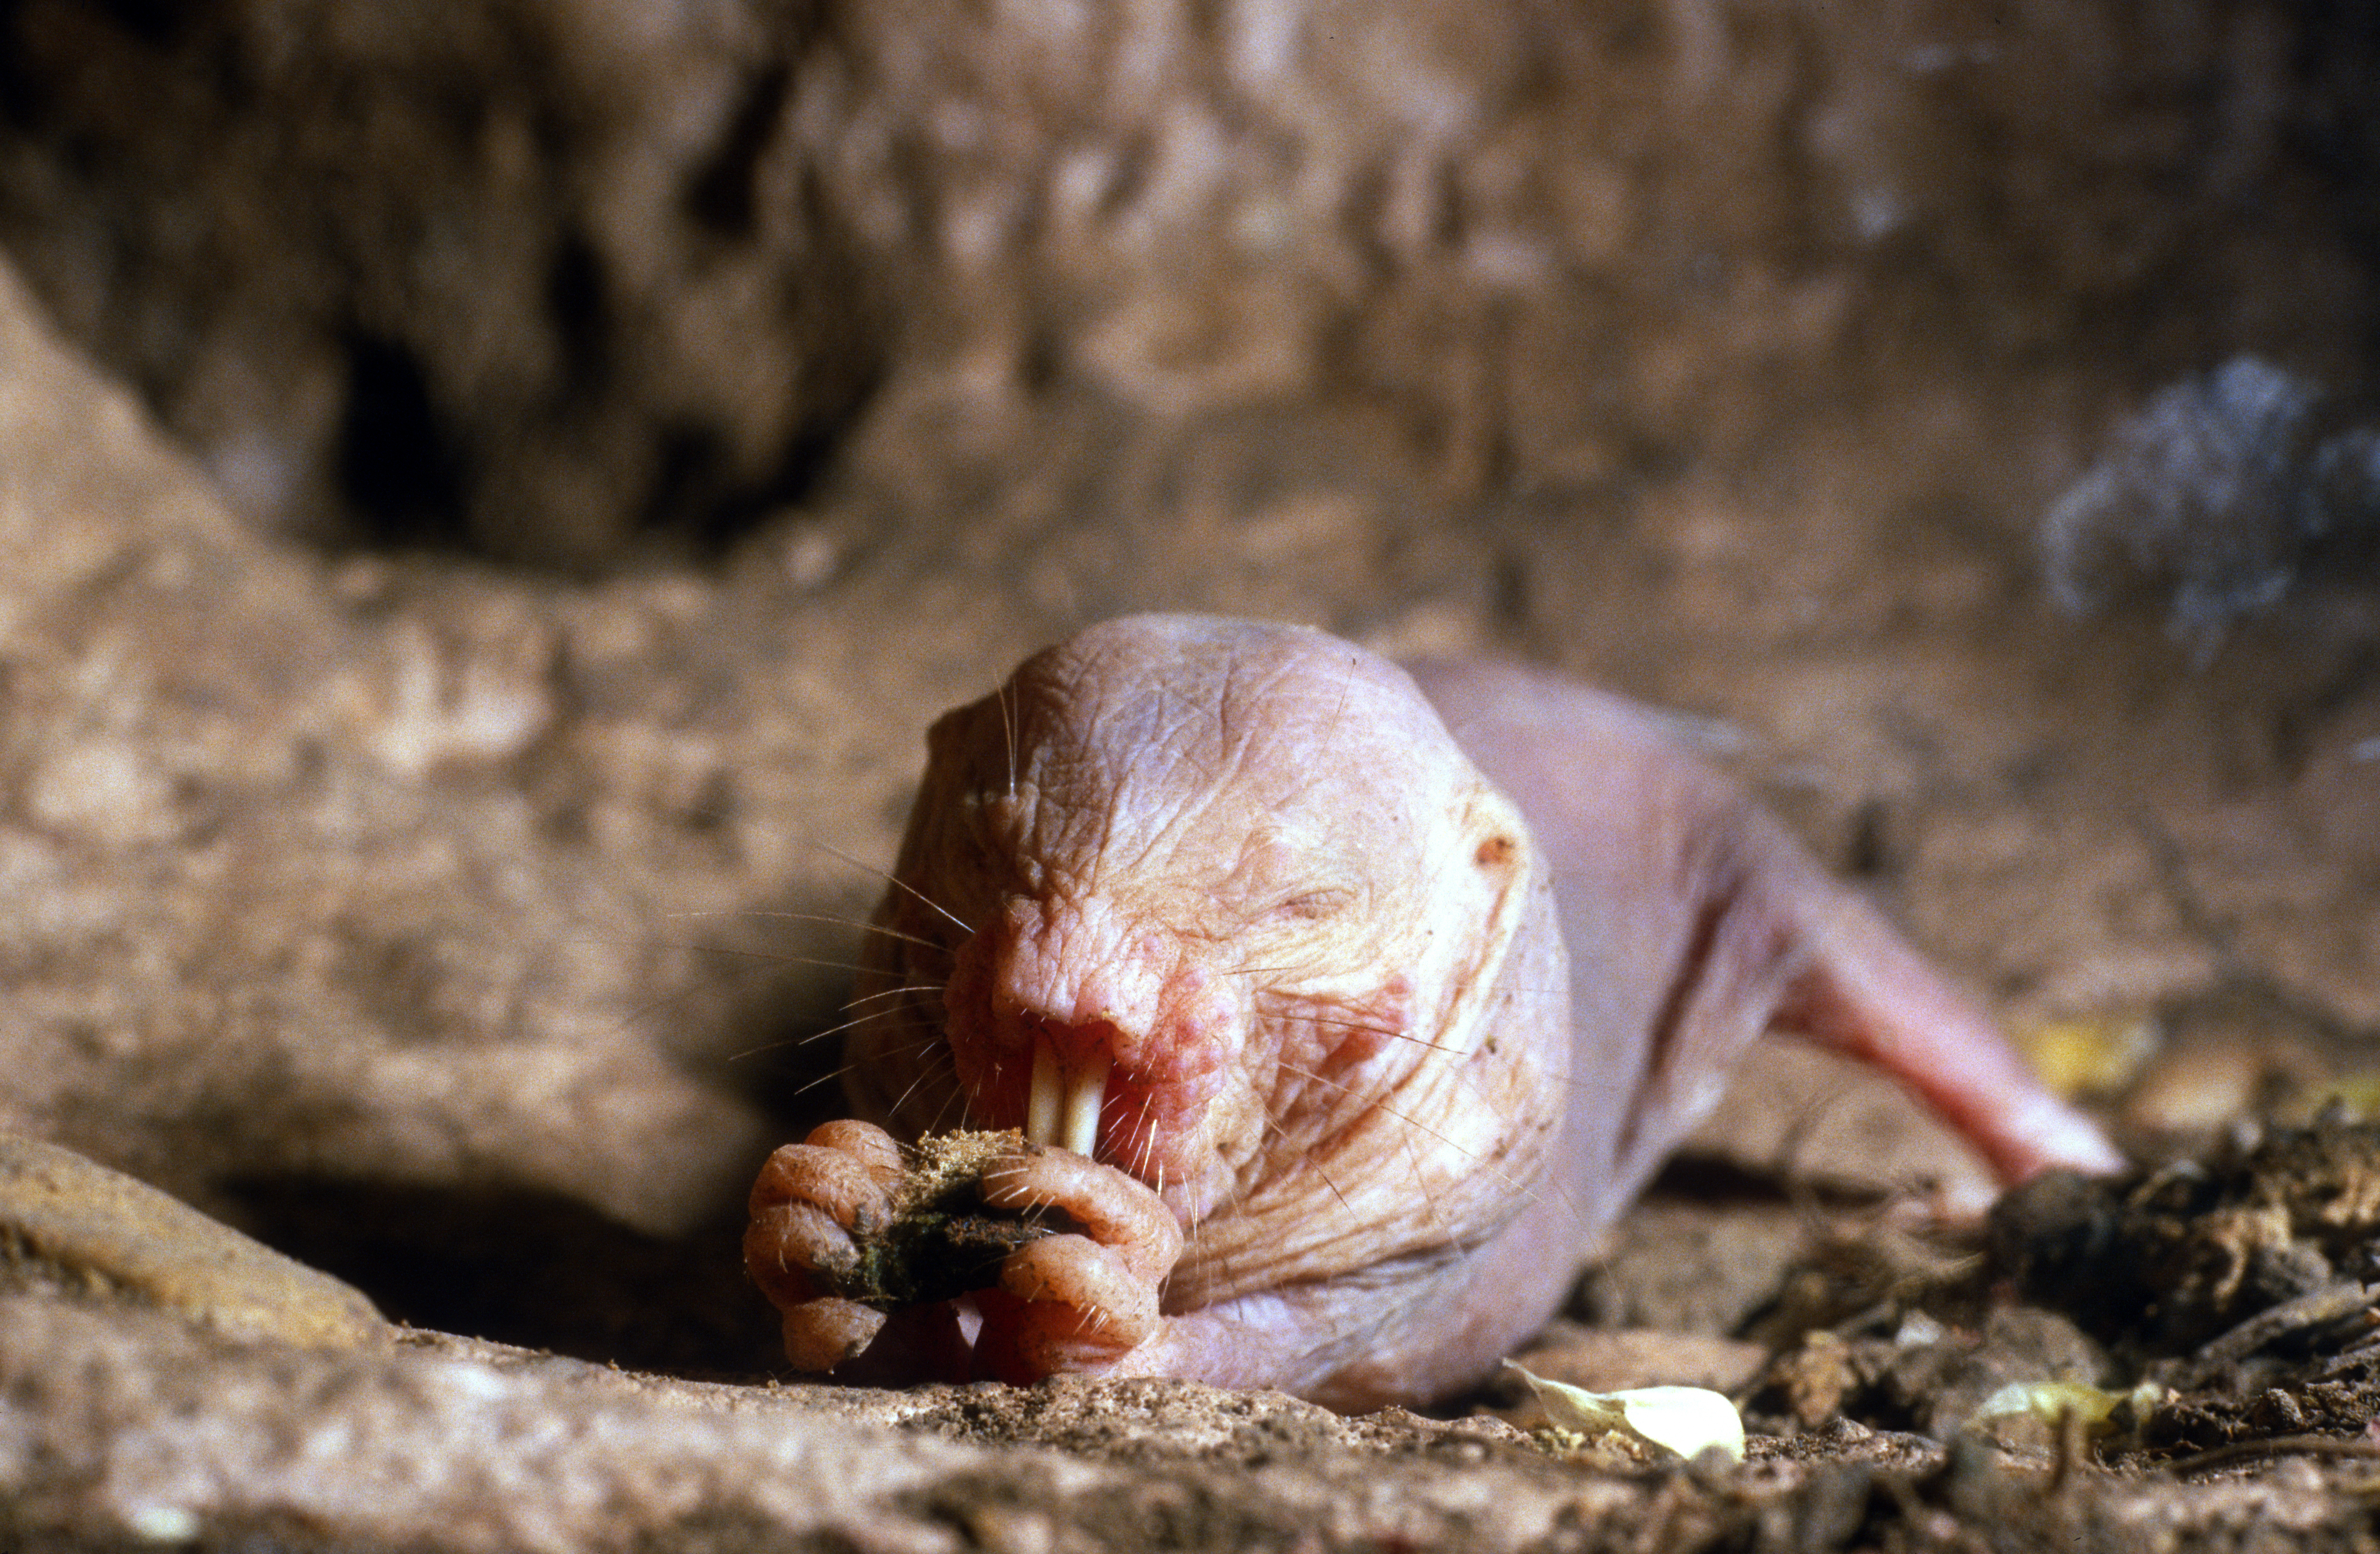 8 animals that may be key to curing human disease - naked mole rat